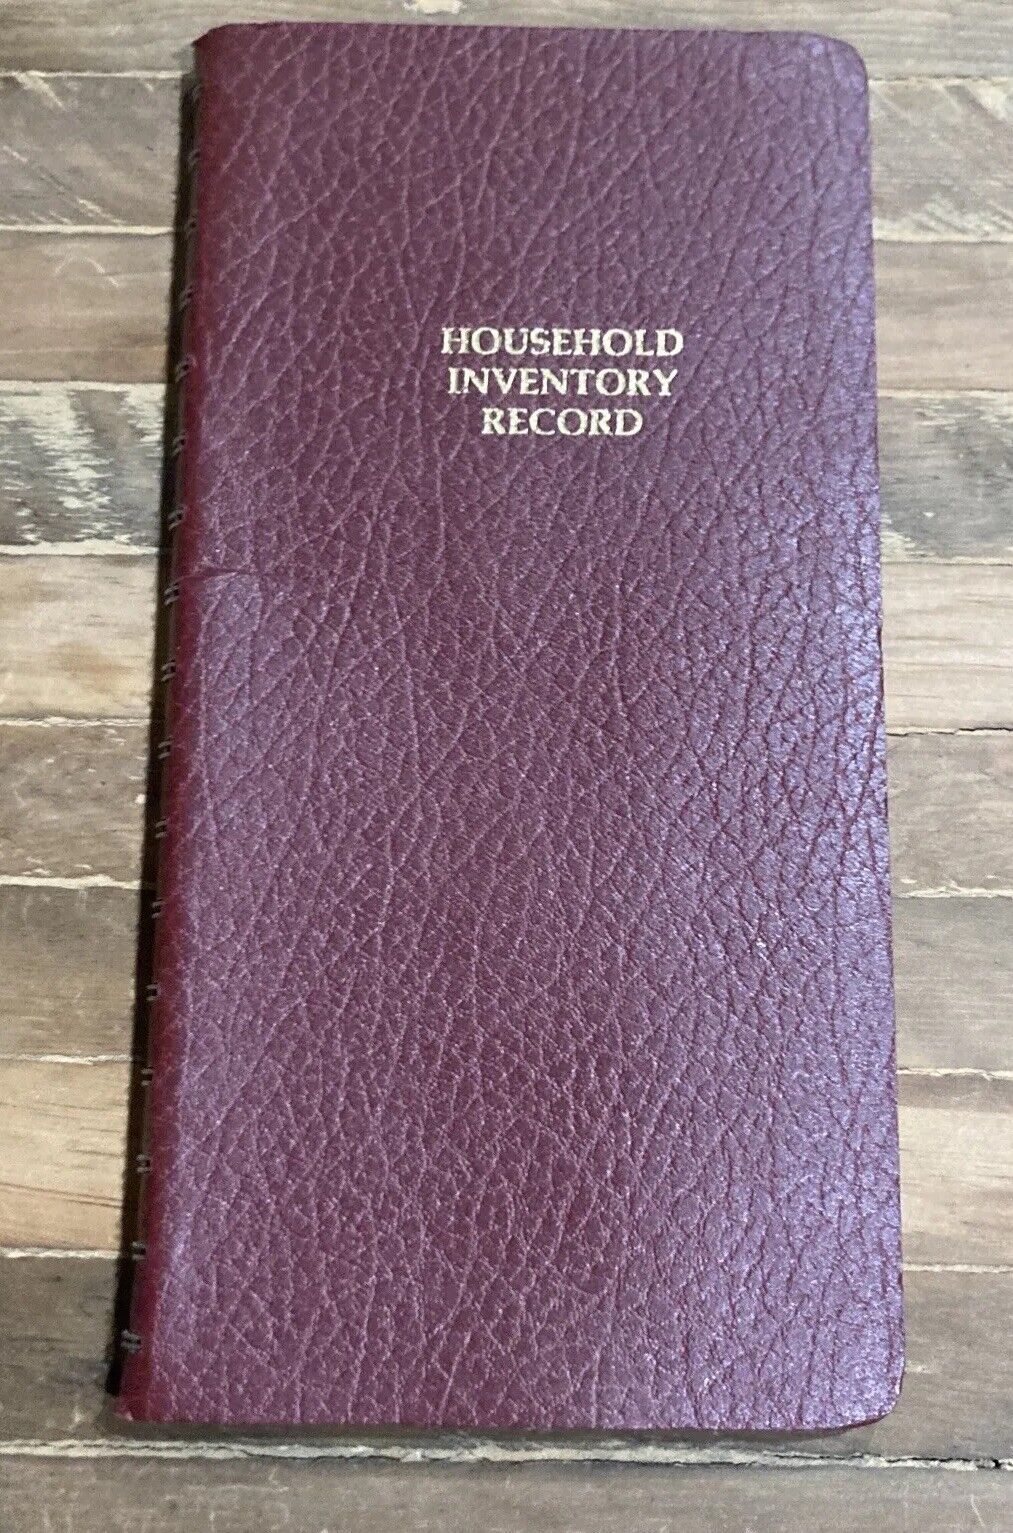 NEW 1978 AT-A-GLANCE Household Inventory Record NOS Insurance Household Picture